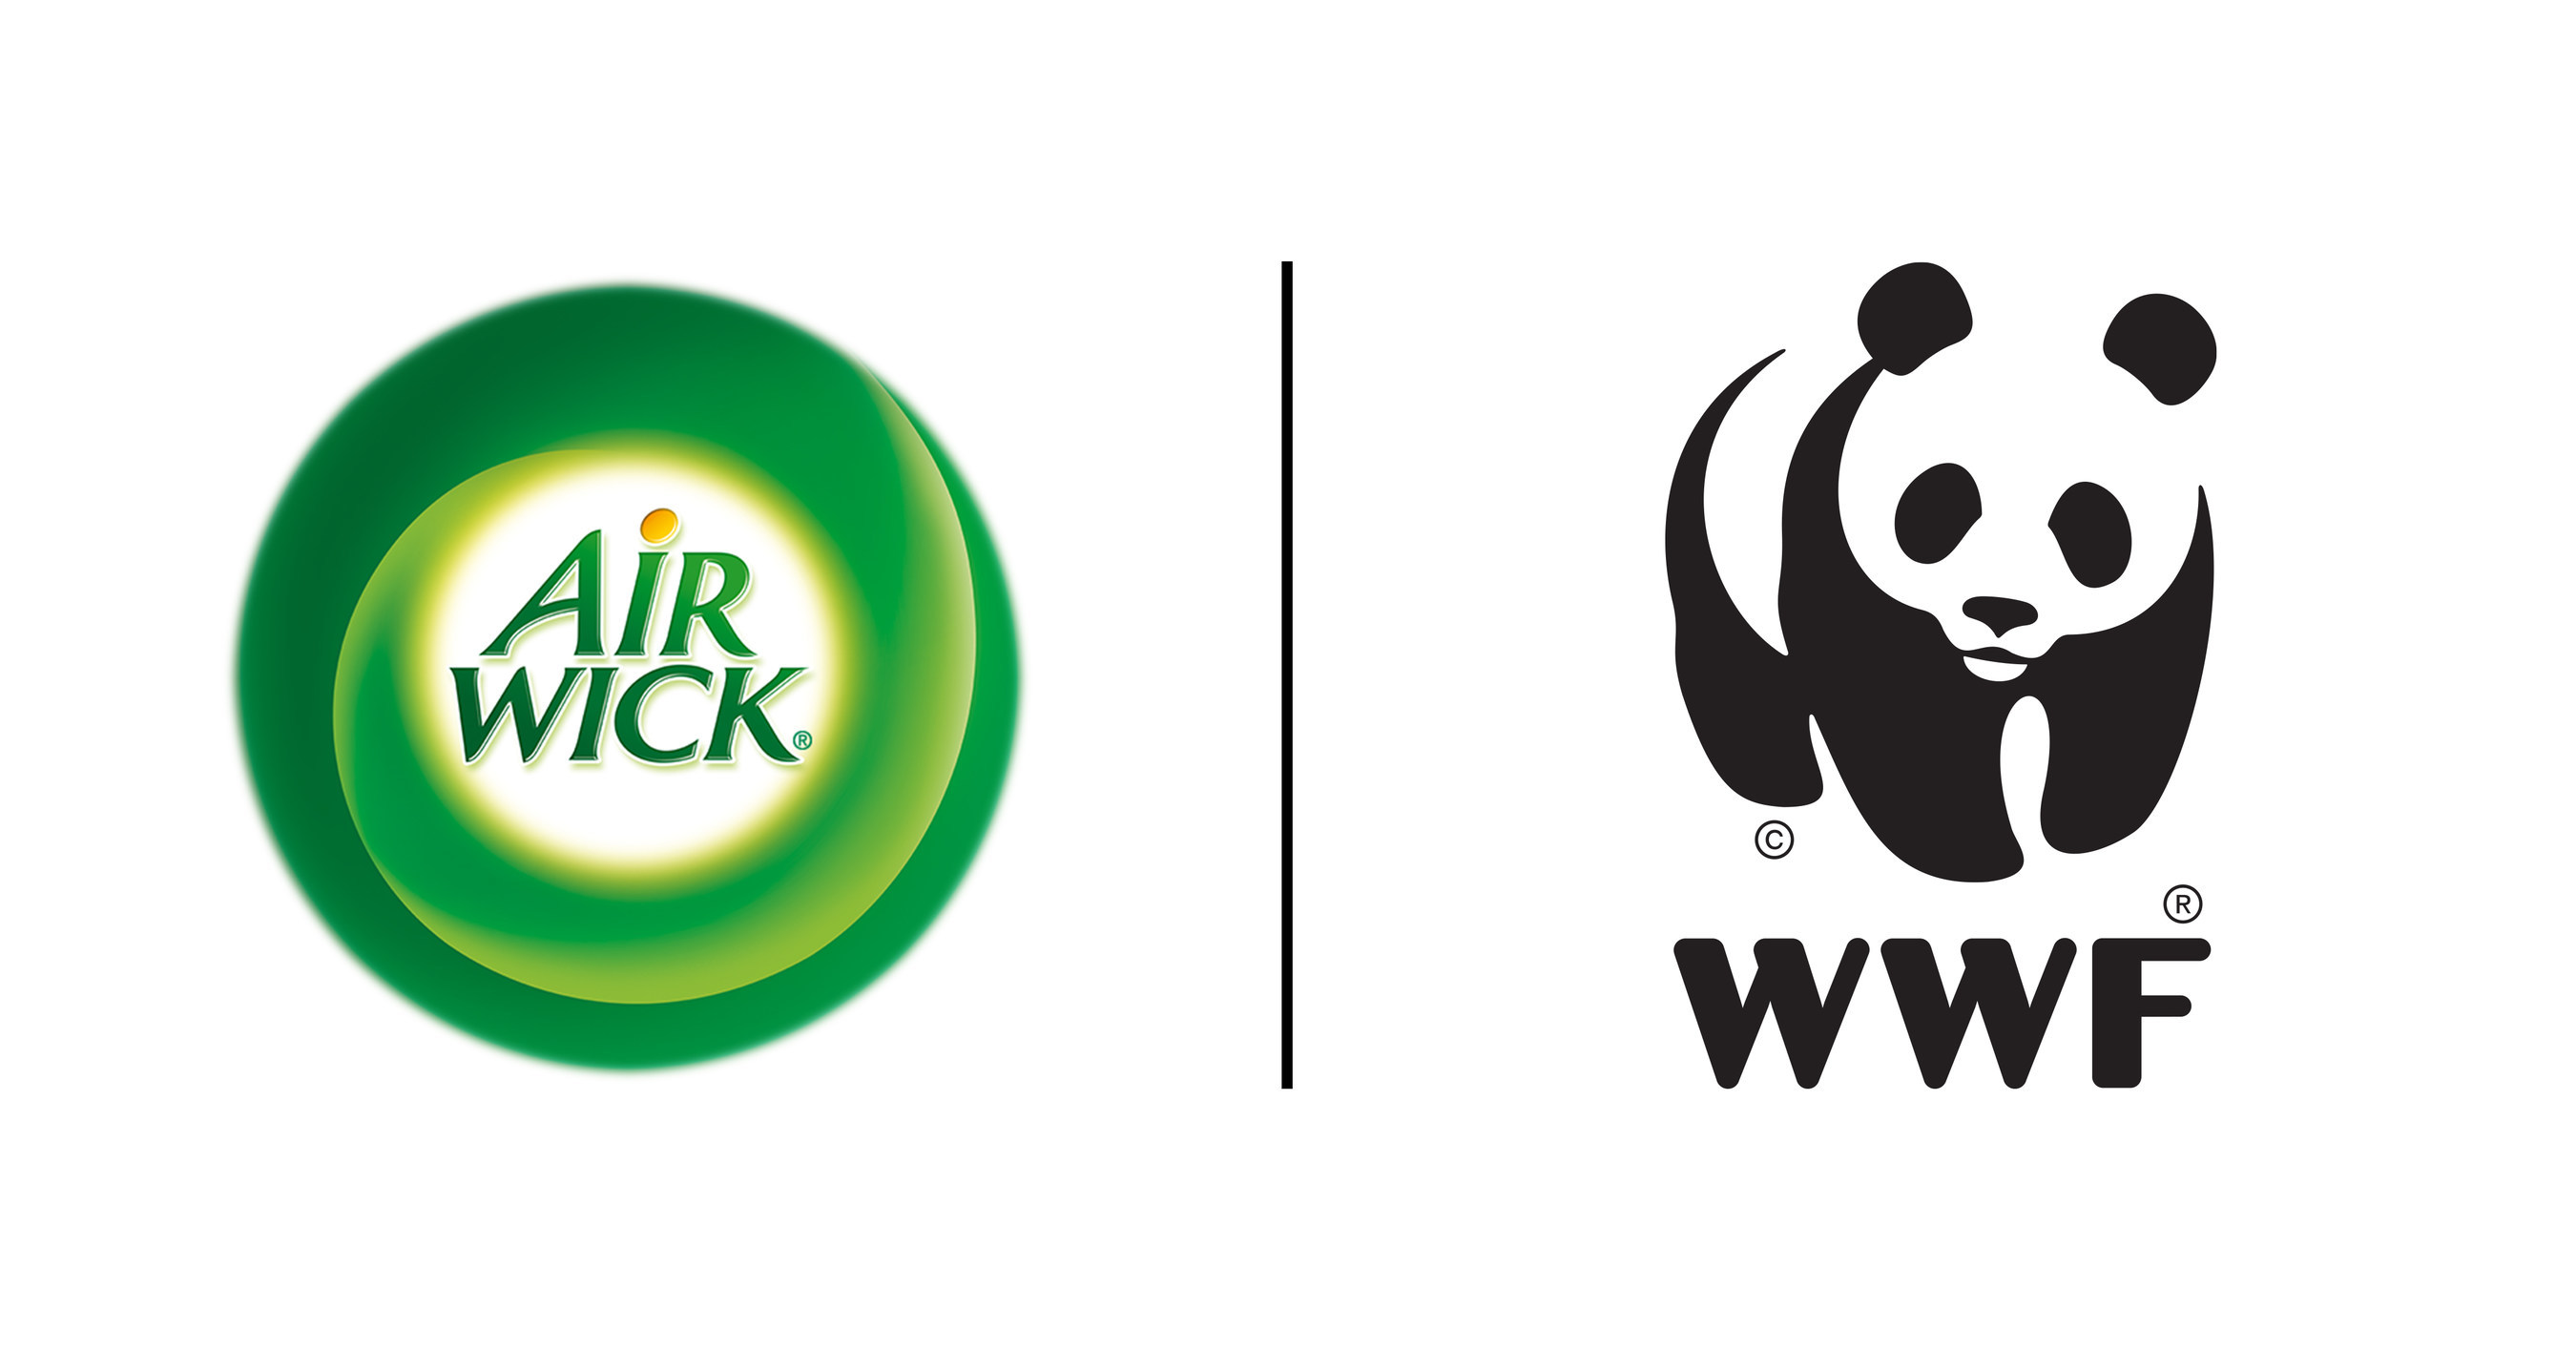 Air Wick Unveils New Look for Its Scented Plug-ins, Bringing People Closer  to Nature - World Brand Design Society